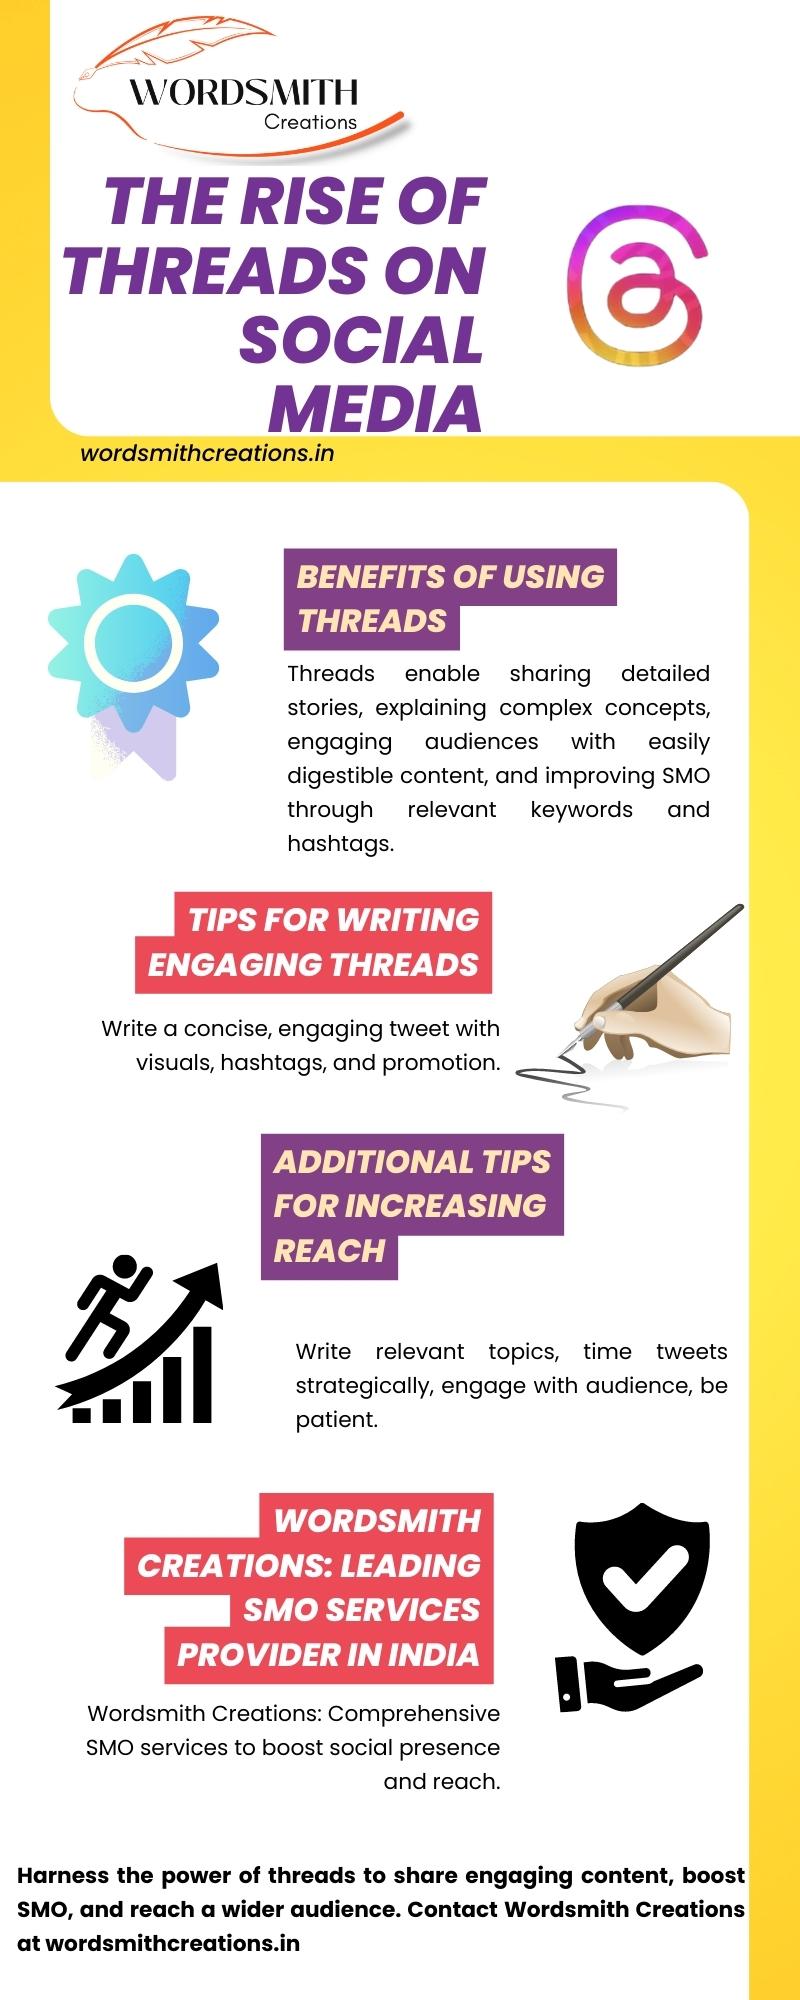 Here are some additional tips for writing threads that get more reach: